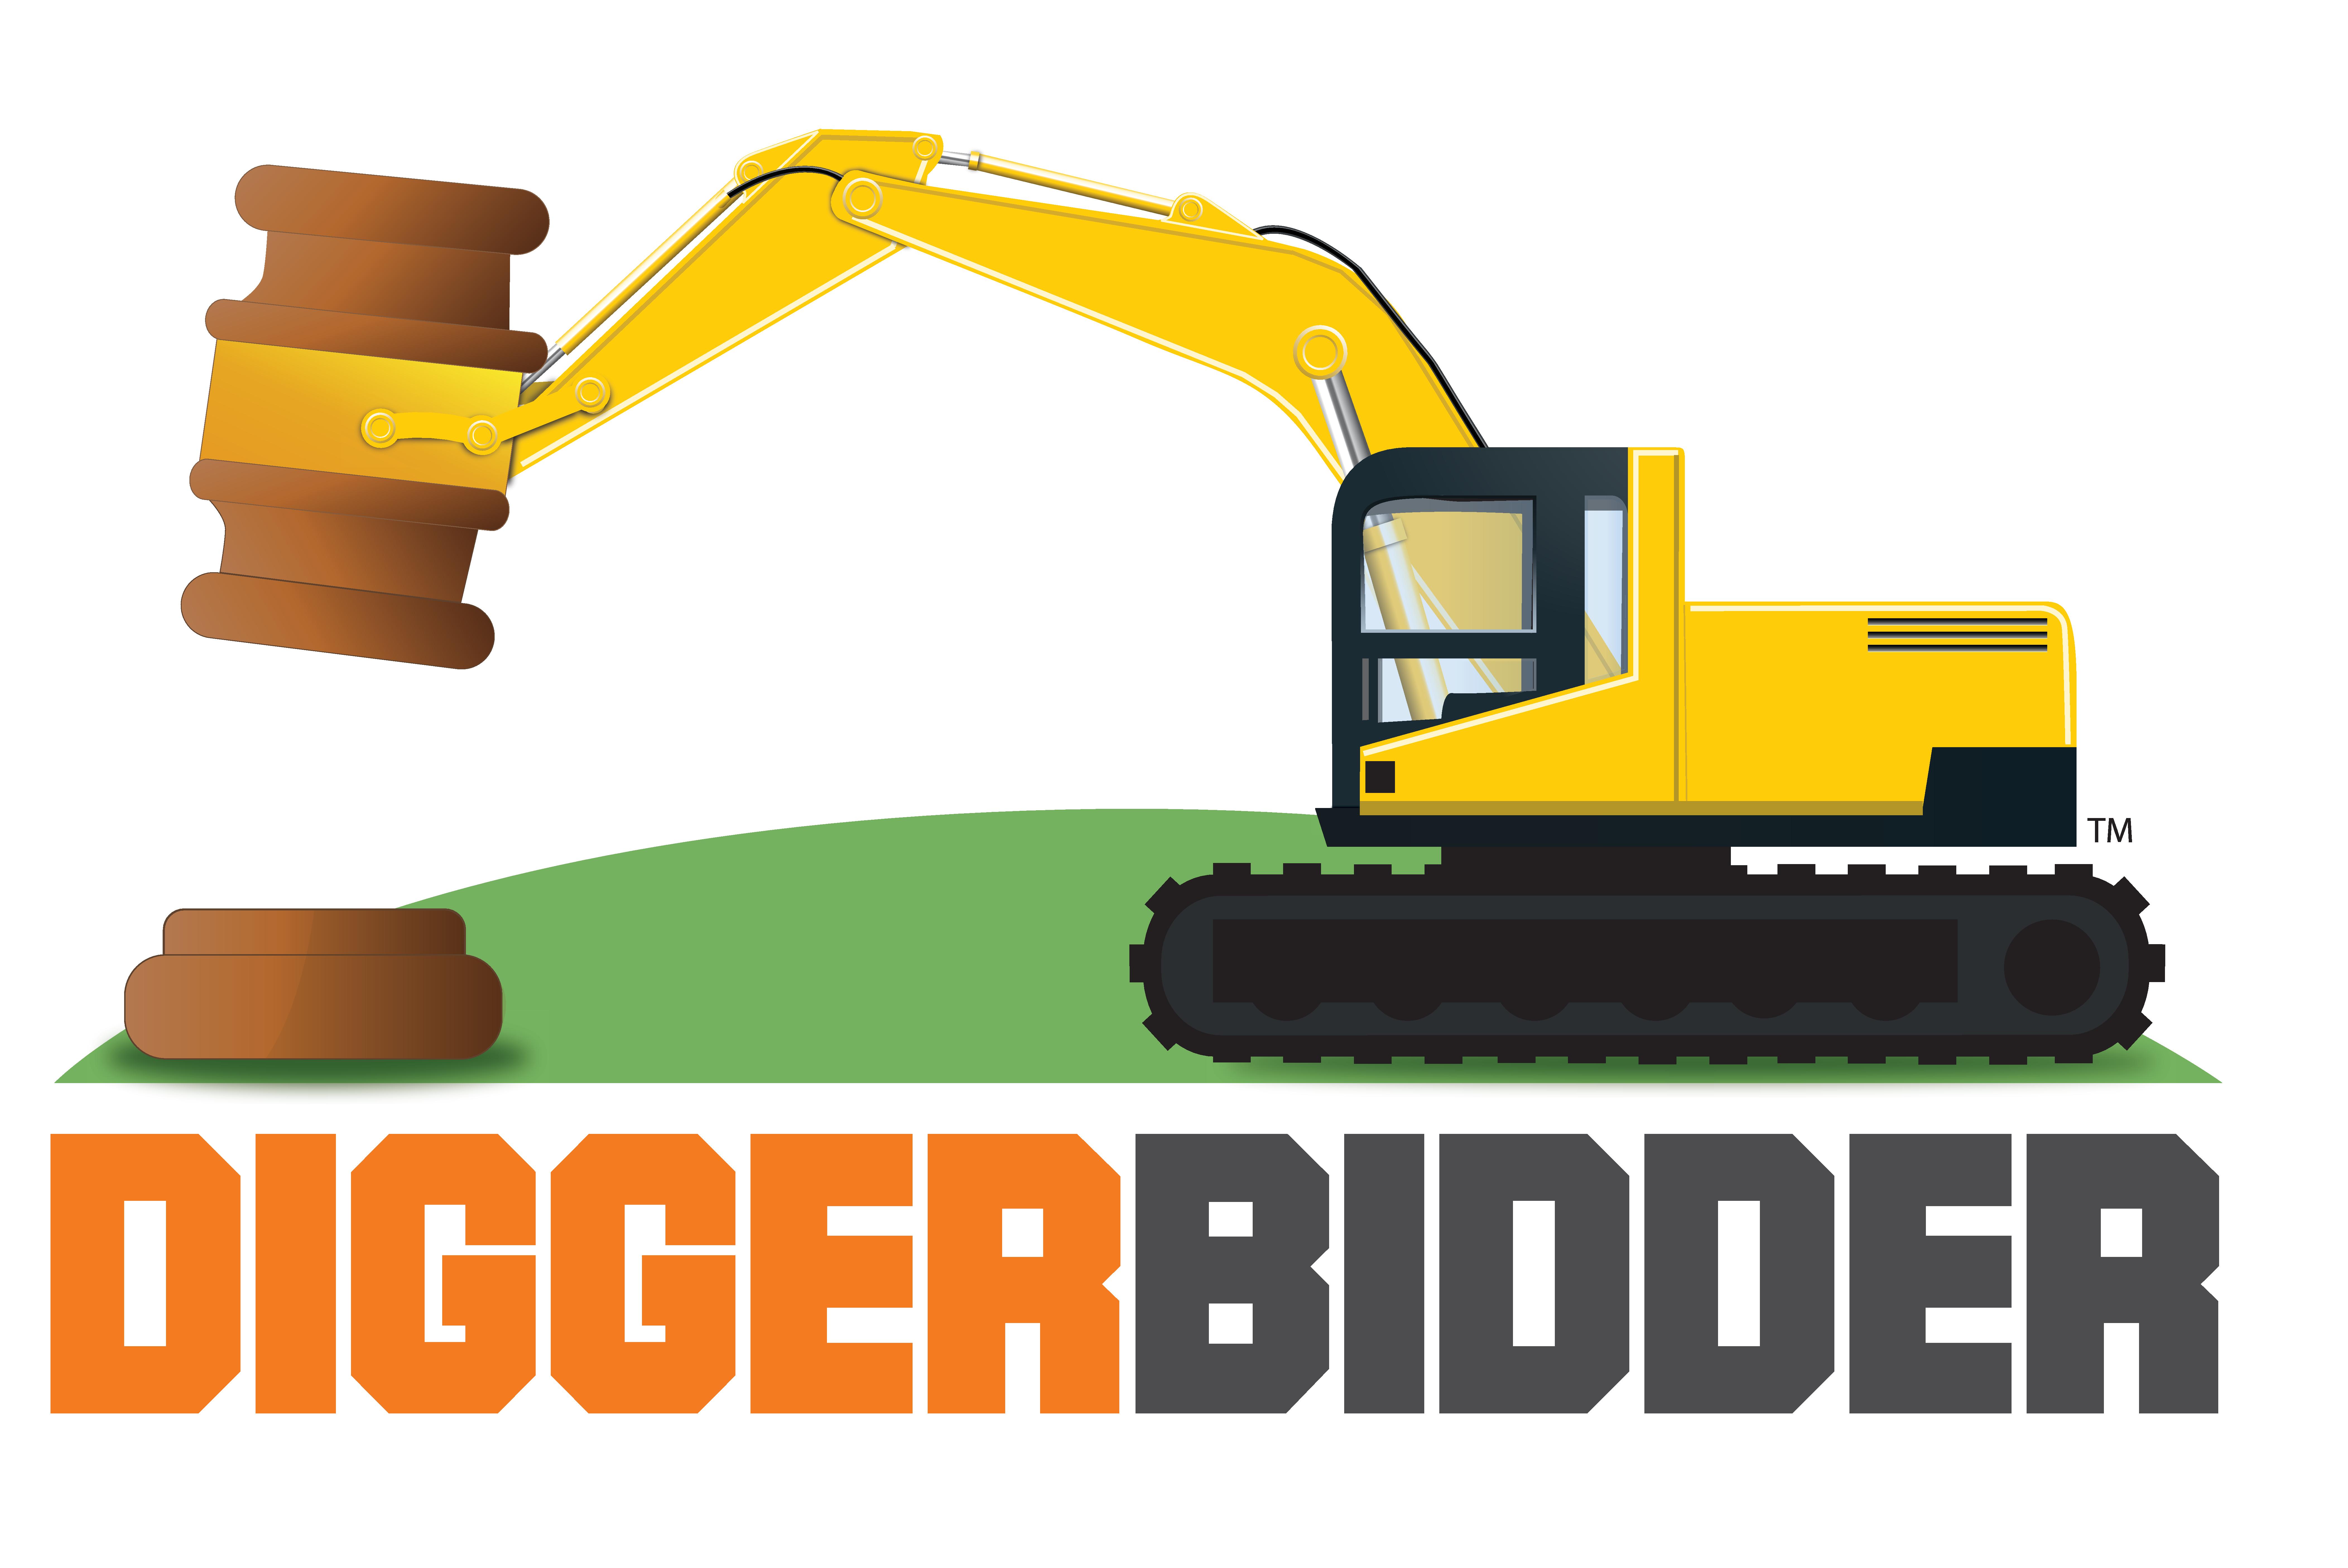 Backhoe clipart plant machinery. Digger bidder the new